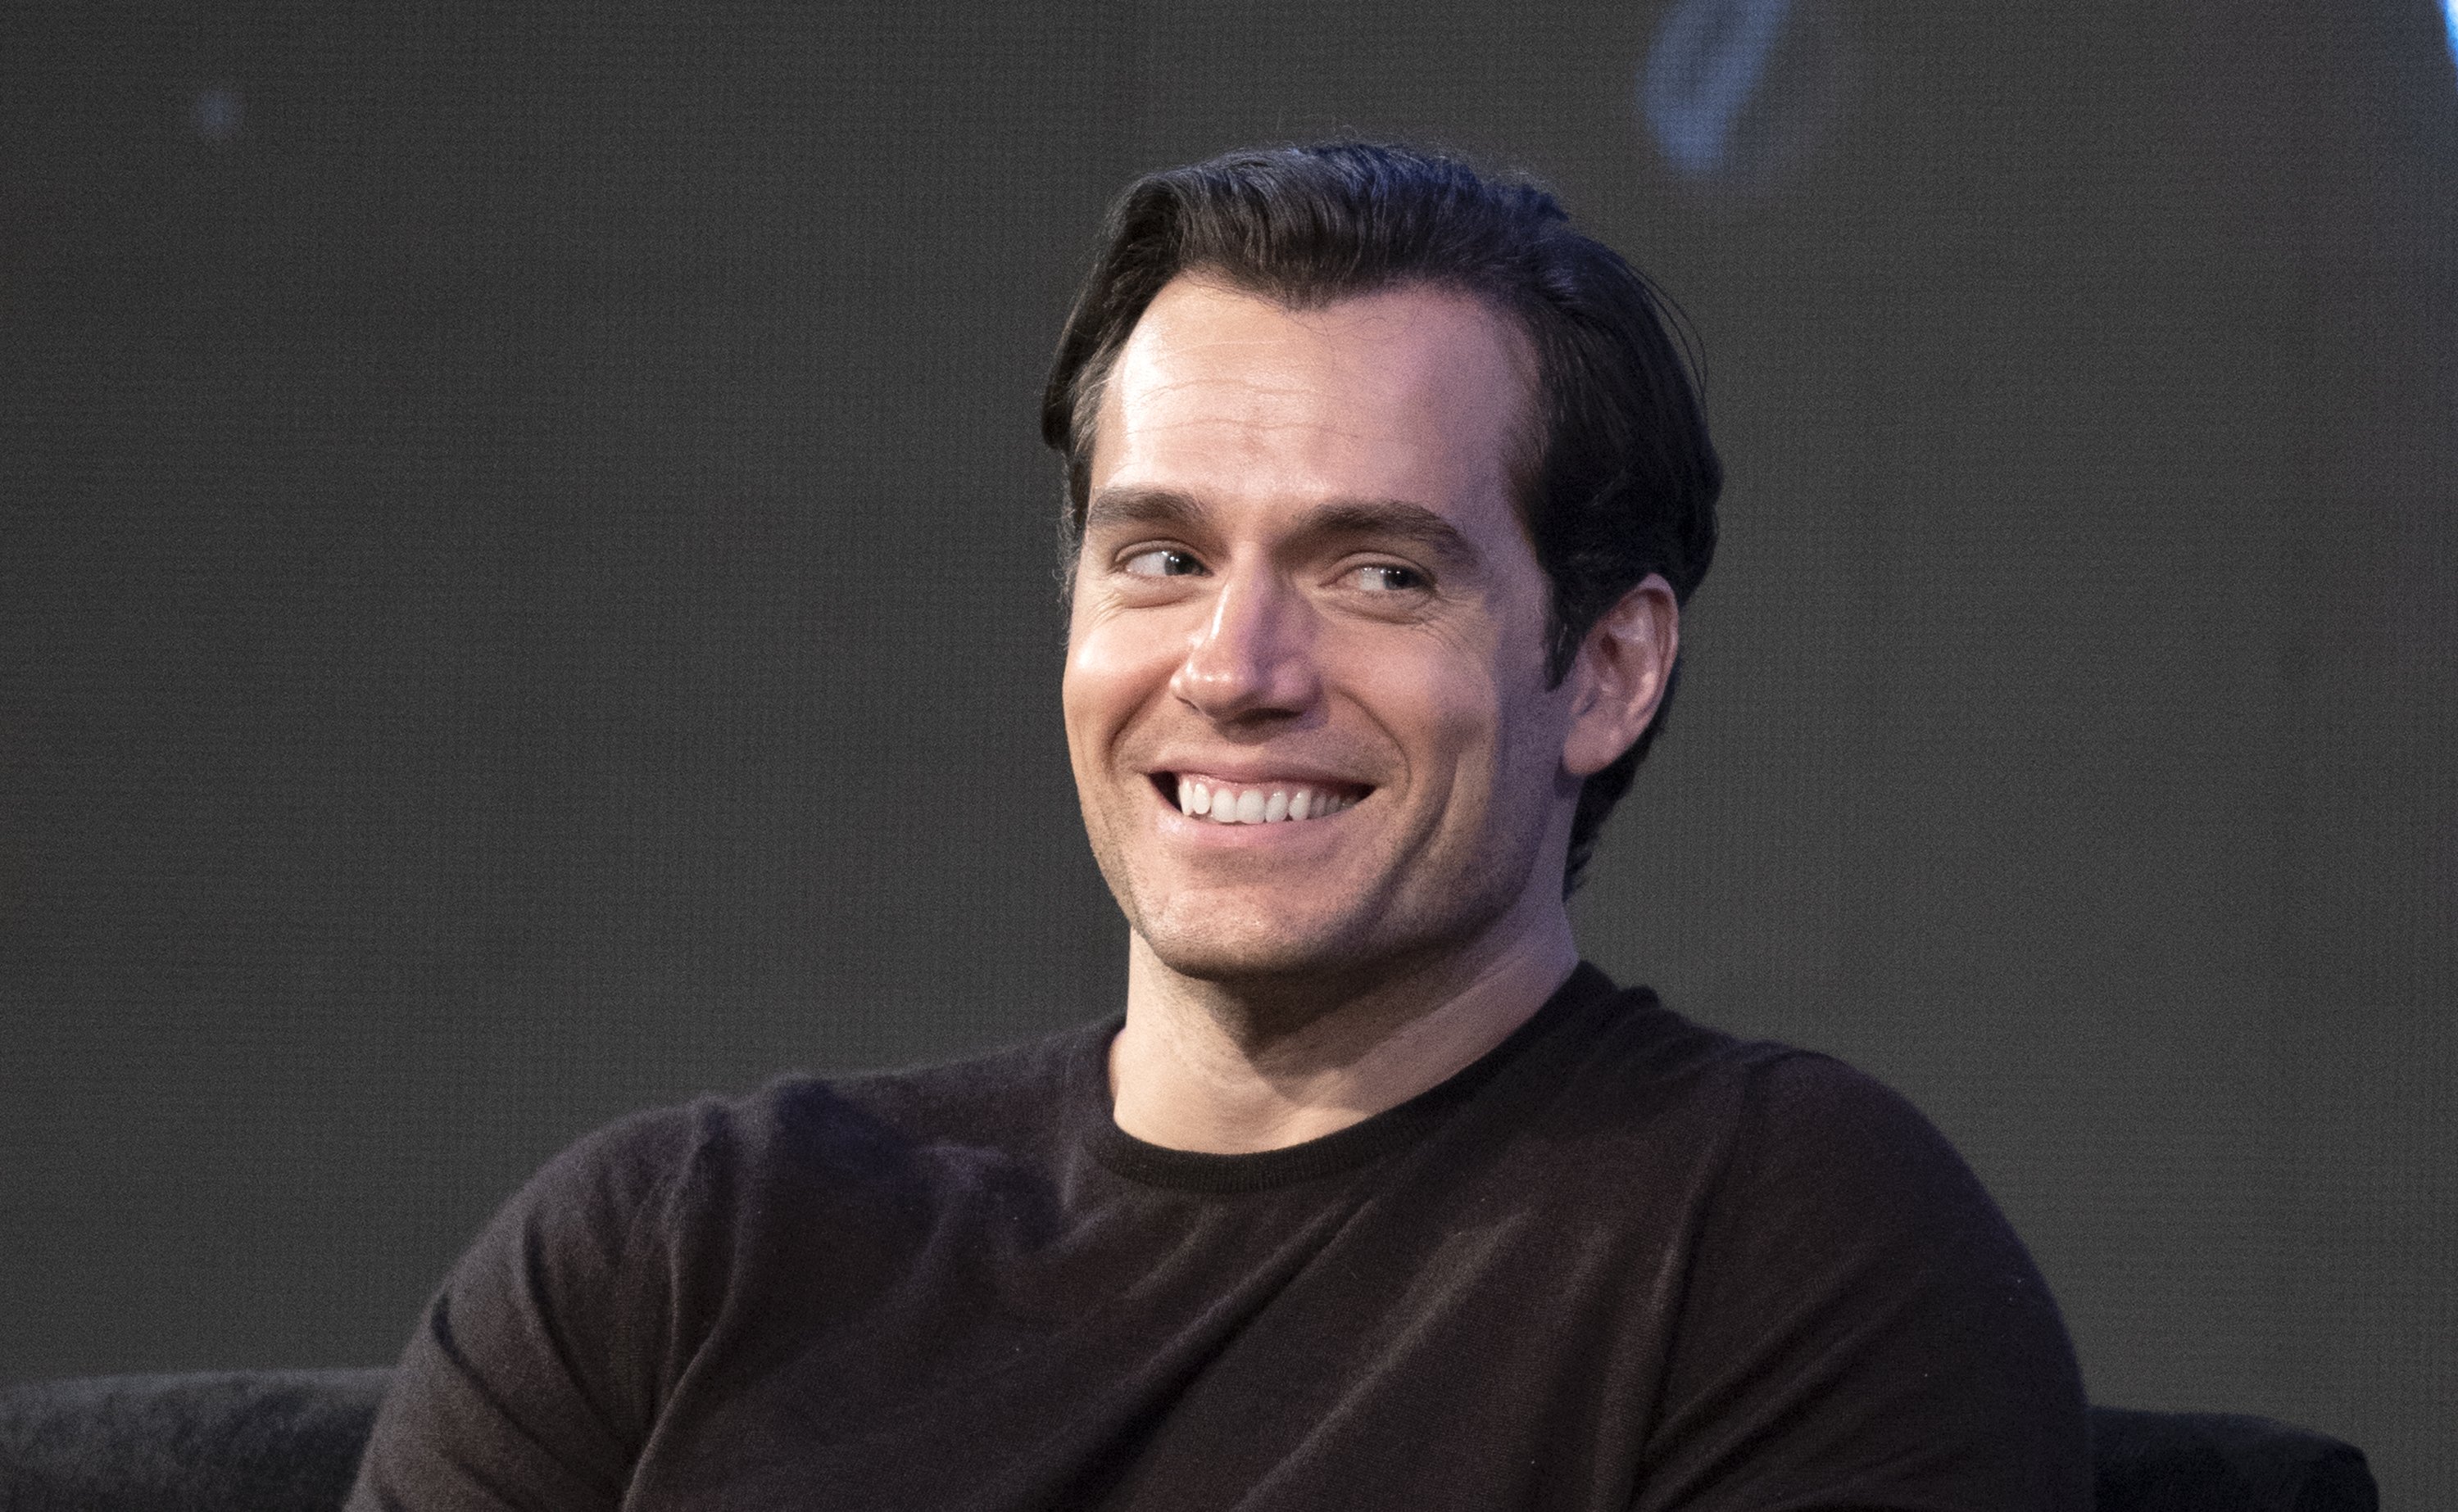 Actor Henry Cavill attends a panel for Netflix's "The Witcher" Season 1 during the 12th edition of Argentina Comic Con on December 7, 2019 in Buenos Aires, Argentina. | Source: Getty Images